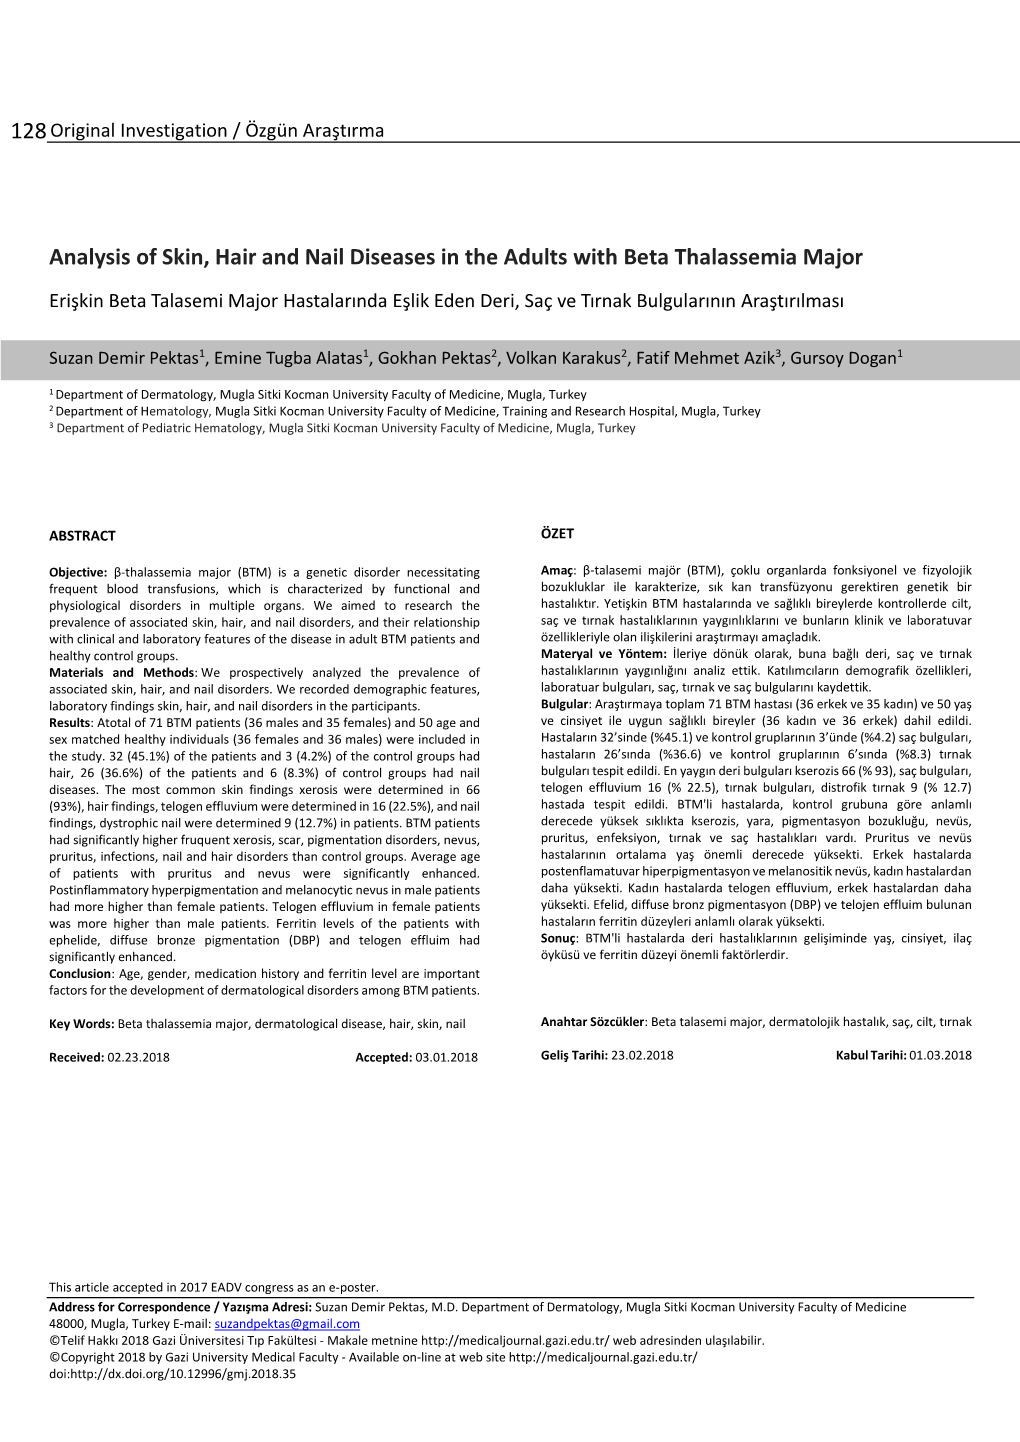 Analysis of Skin, Hair and Nail Diseases in the Adults with Beta Thalassemia Major